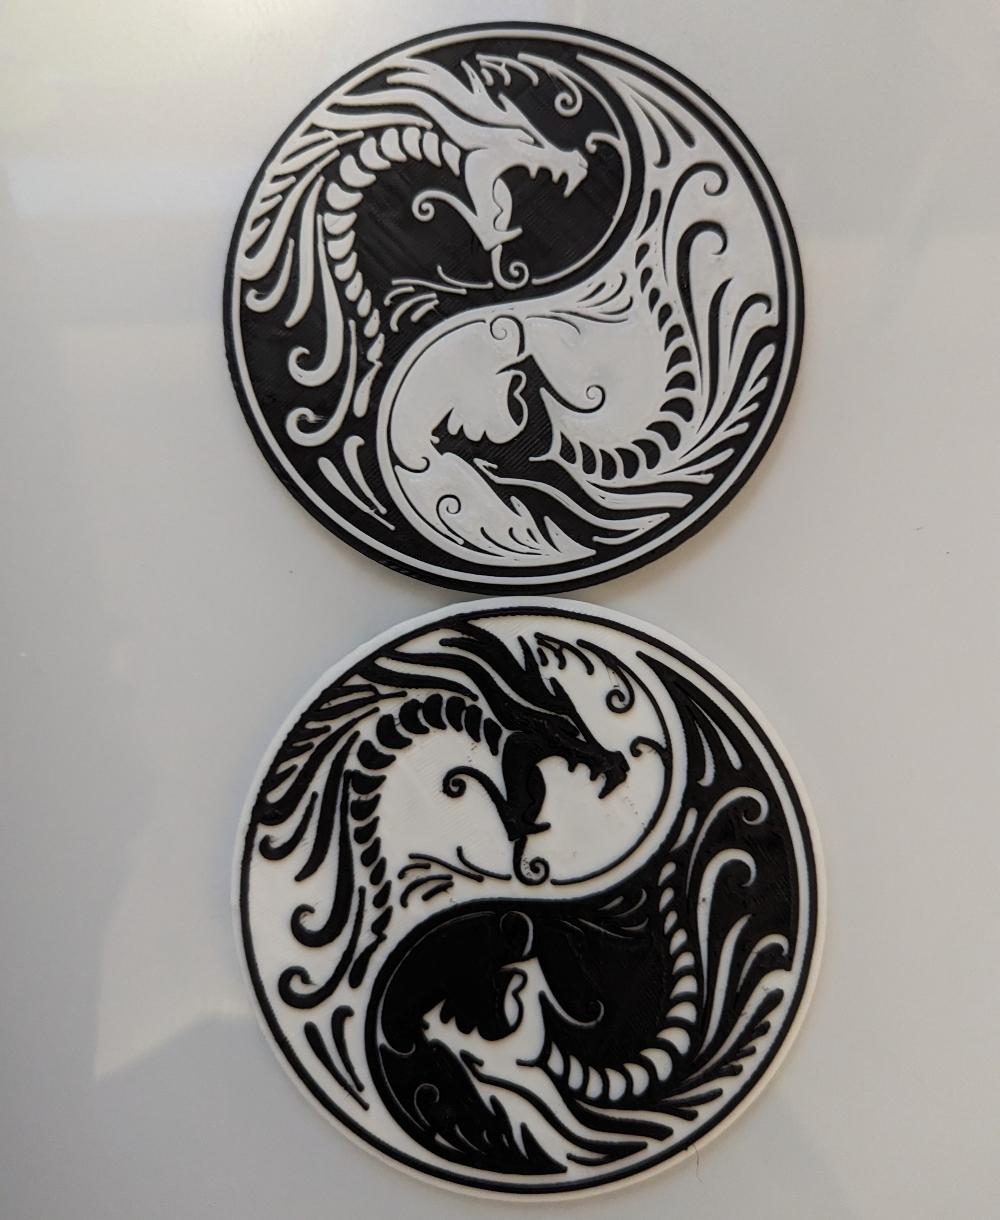 Year of the Dragon Yin Yang - Shrunk the model by 50% on x and y which made them perfectly coaster sized, but mostly did that because I was short on both black and white filament. 
I also used the Command M600 rather than M25 now that my printer supports that one.
(The whole story of that is in the comments of the models post) - 3d model